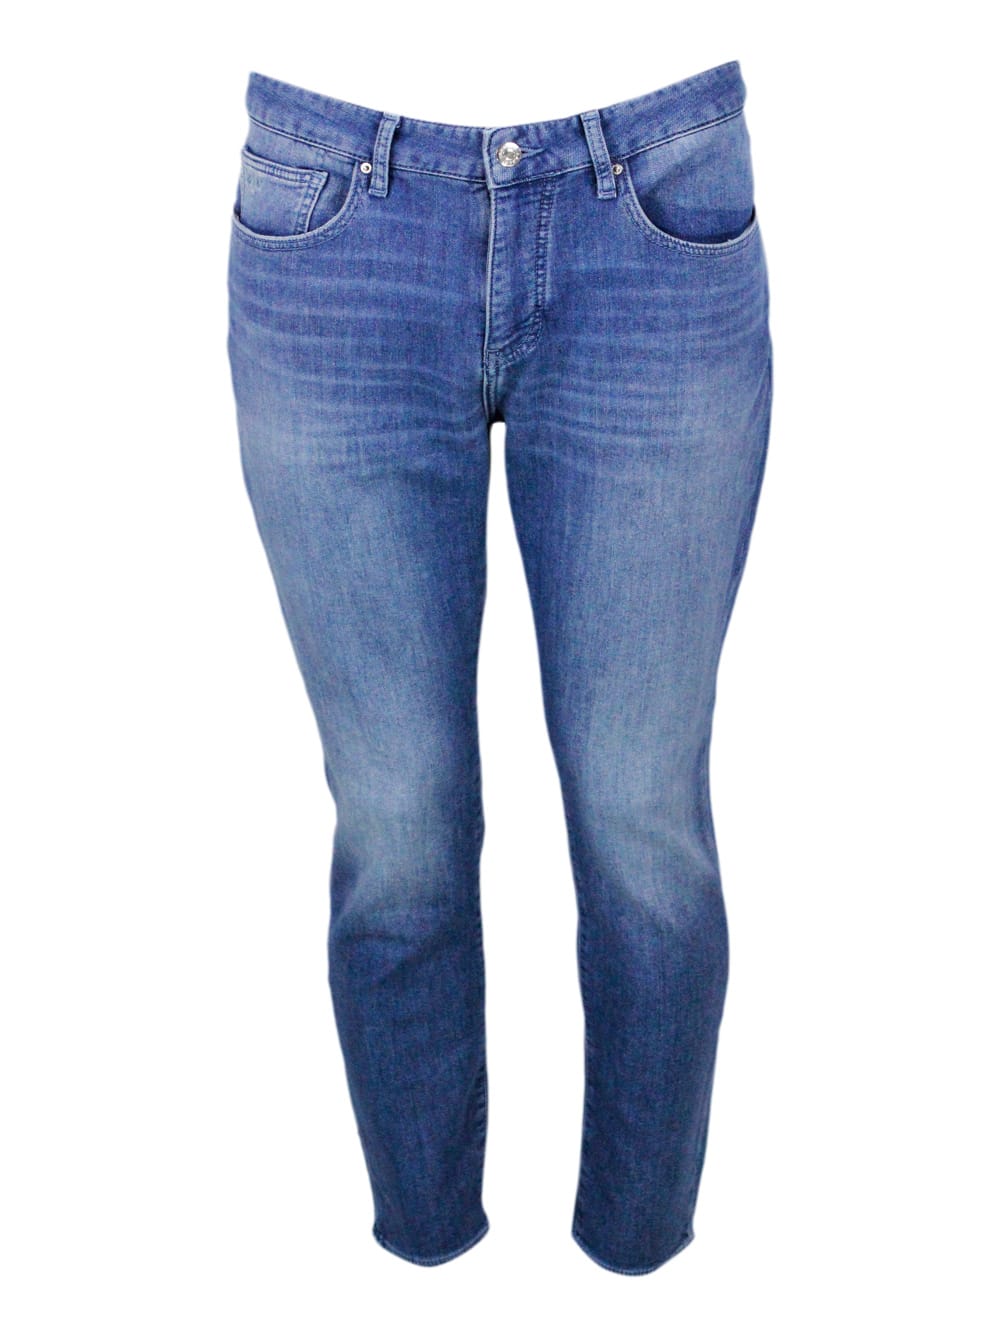 Skinny Jeans In Soft Stretch Denim With Matching Stitching And Leather Tab. Zip And Button Closure